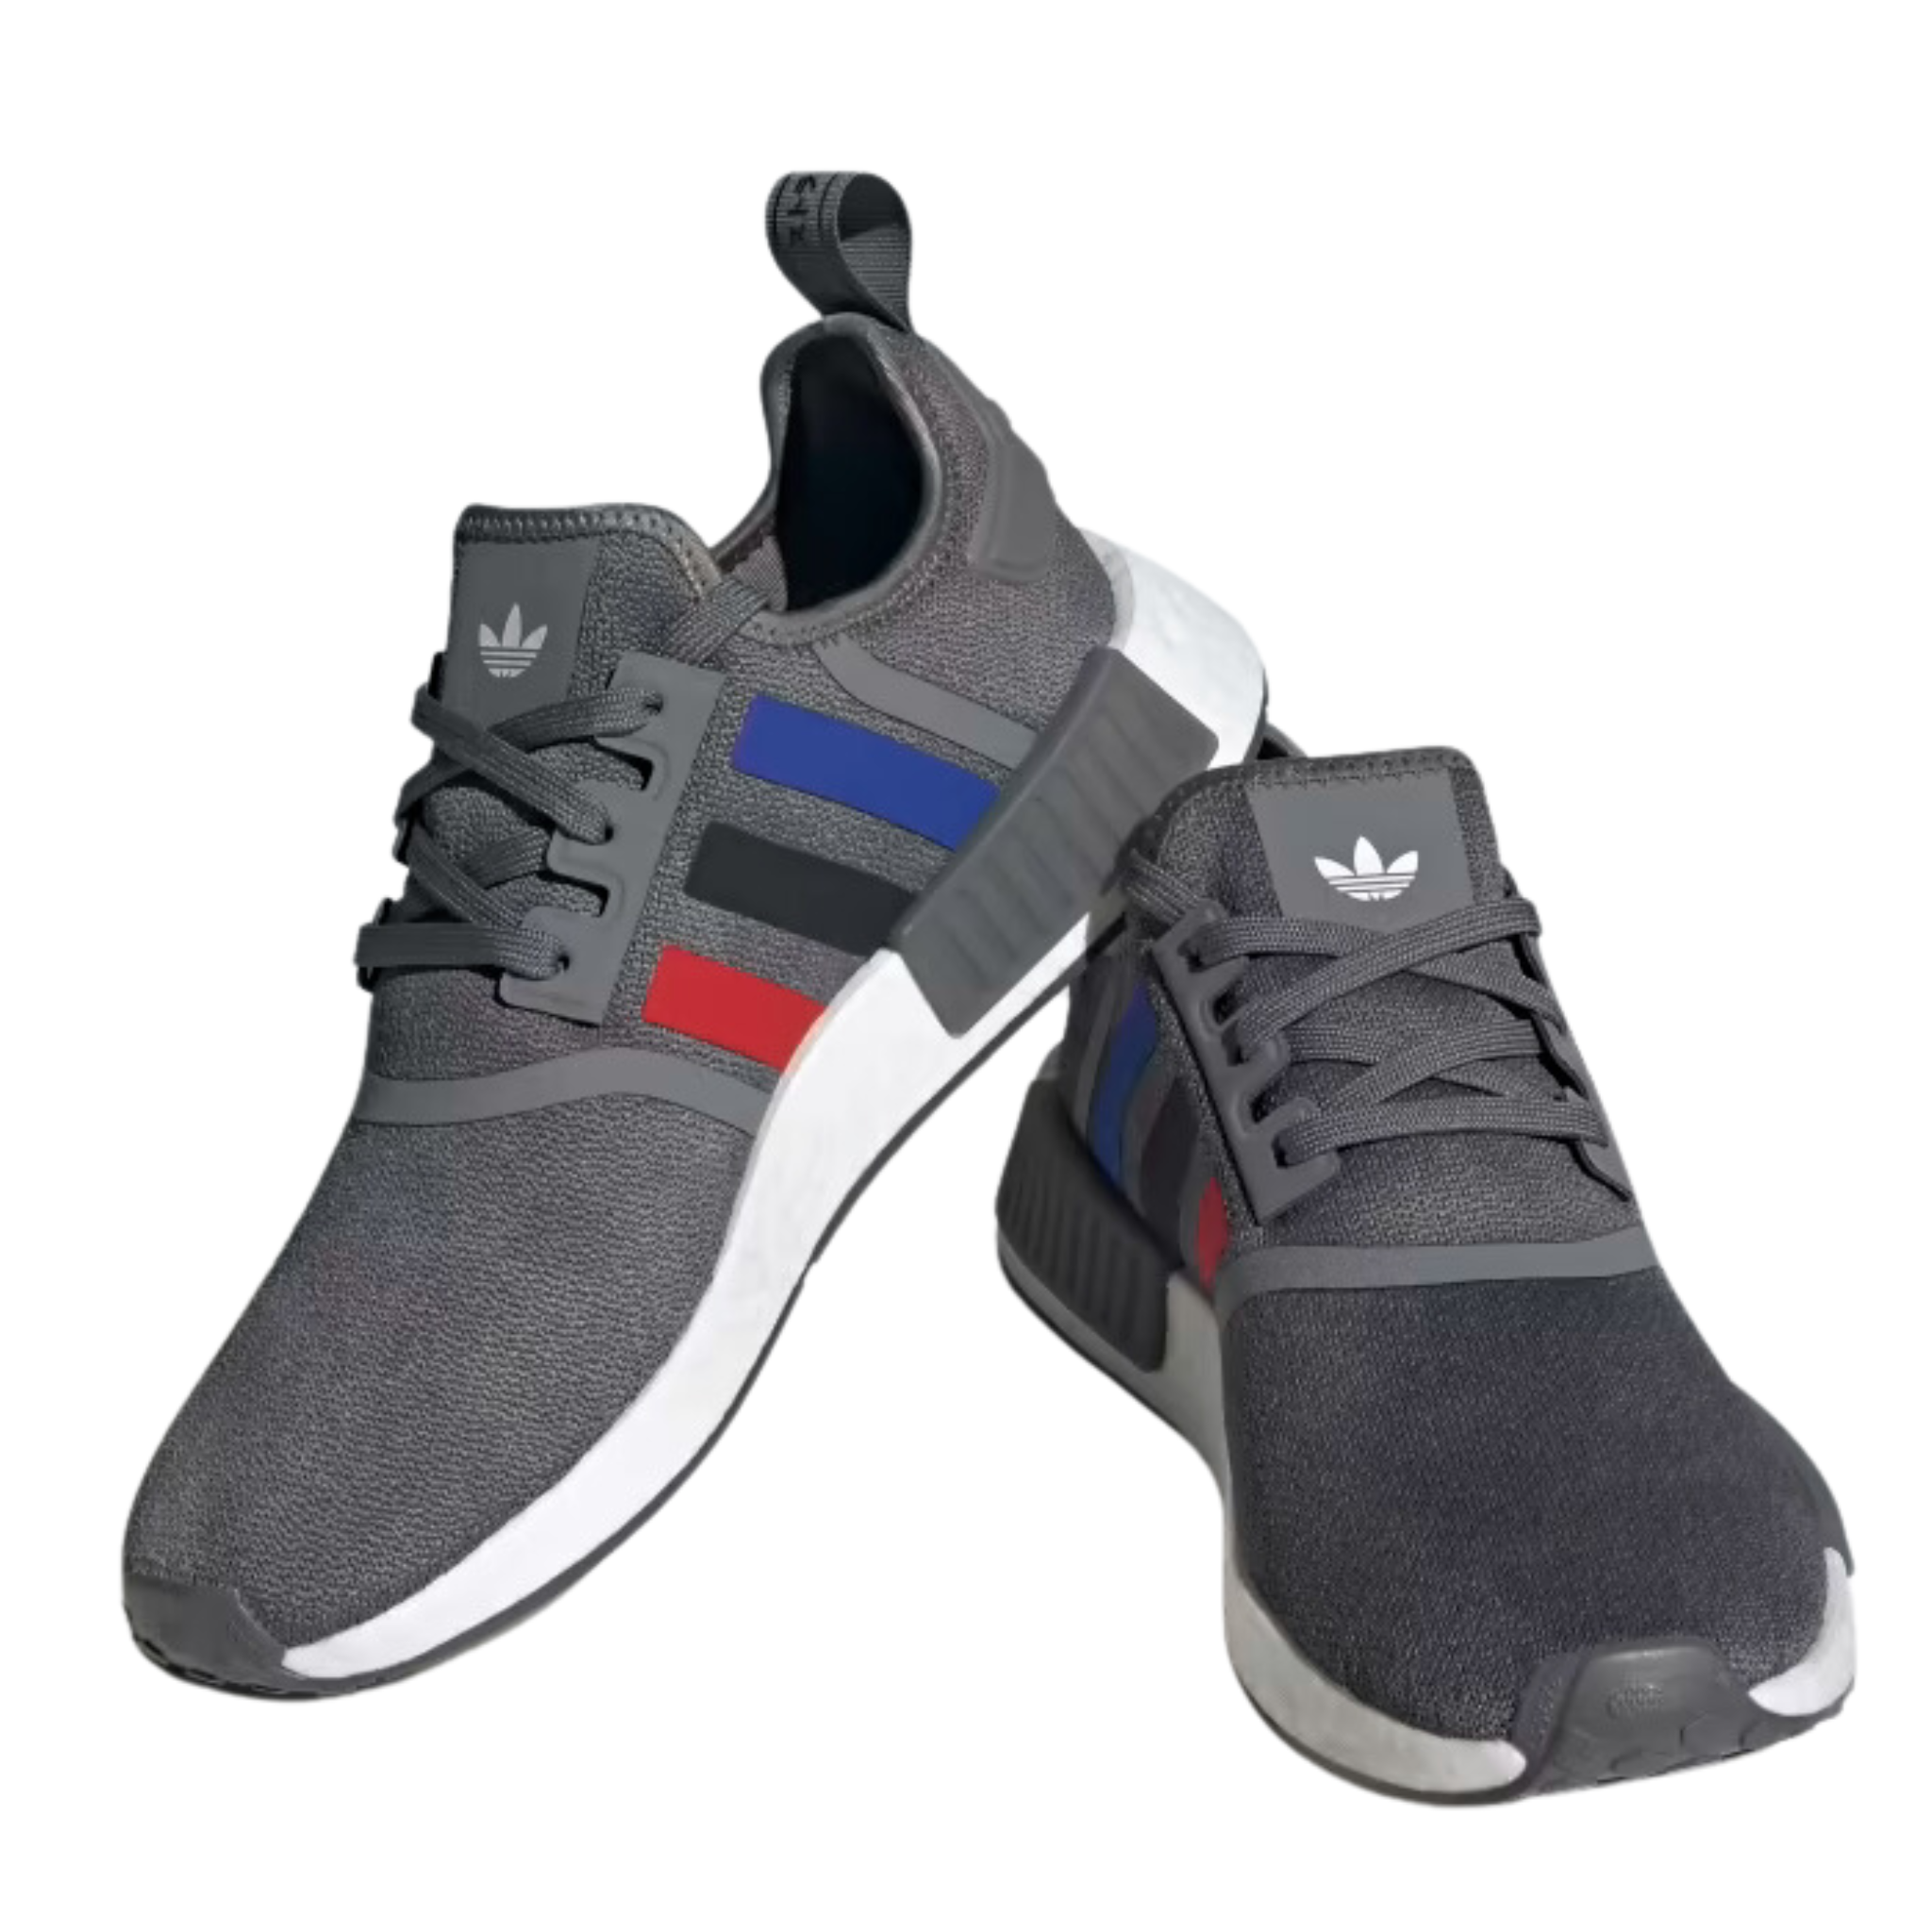 adidas Men's NMD_R1 Shoes (Grey Four/Better Scarlet/Core Black)